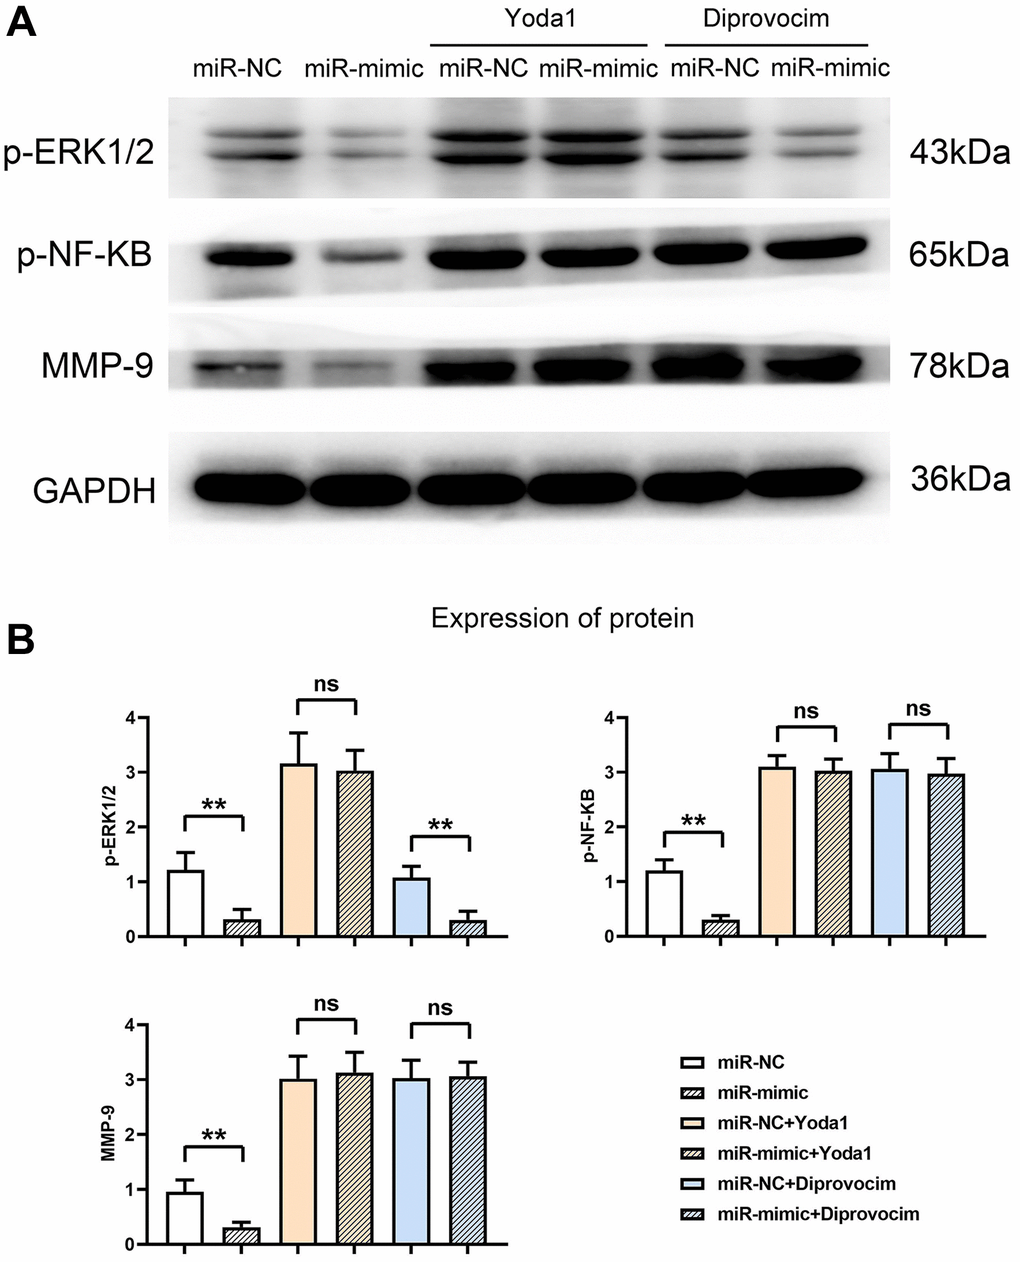 Overexpression of miR-361-5p inhibits the expression of MMPs by inhibiting the ERK1/2/NF-κB signaling pathway. (A) Protein band plots of p-ERK1/2, p-NF-κB and MMP9. (B) Relative protein expression statistics of p-ERK1/2, p-NF-κB and MMP9. N = 3; **P nsP > 0.05, miR-NC+Yoda1 vs. miR-mimic+Yoda1, miR-NC+Diprovocim vs. miR-mimic+Diprovocim.